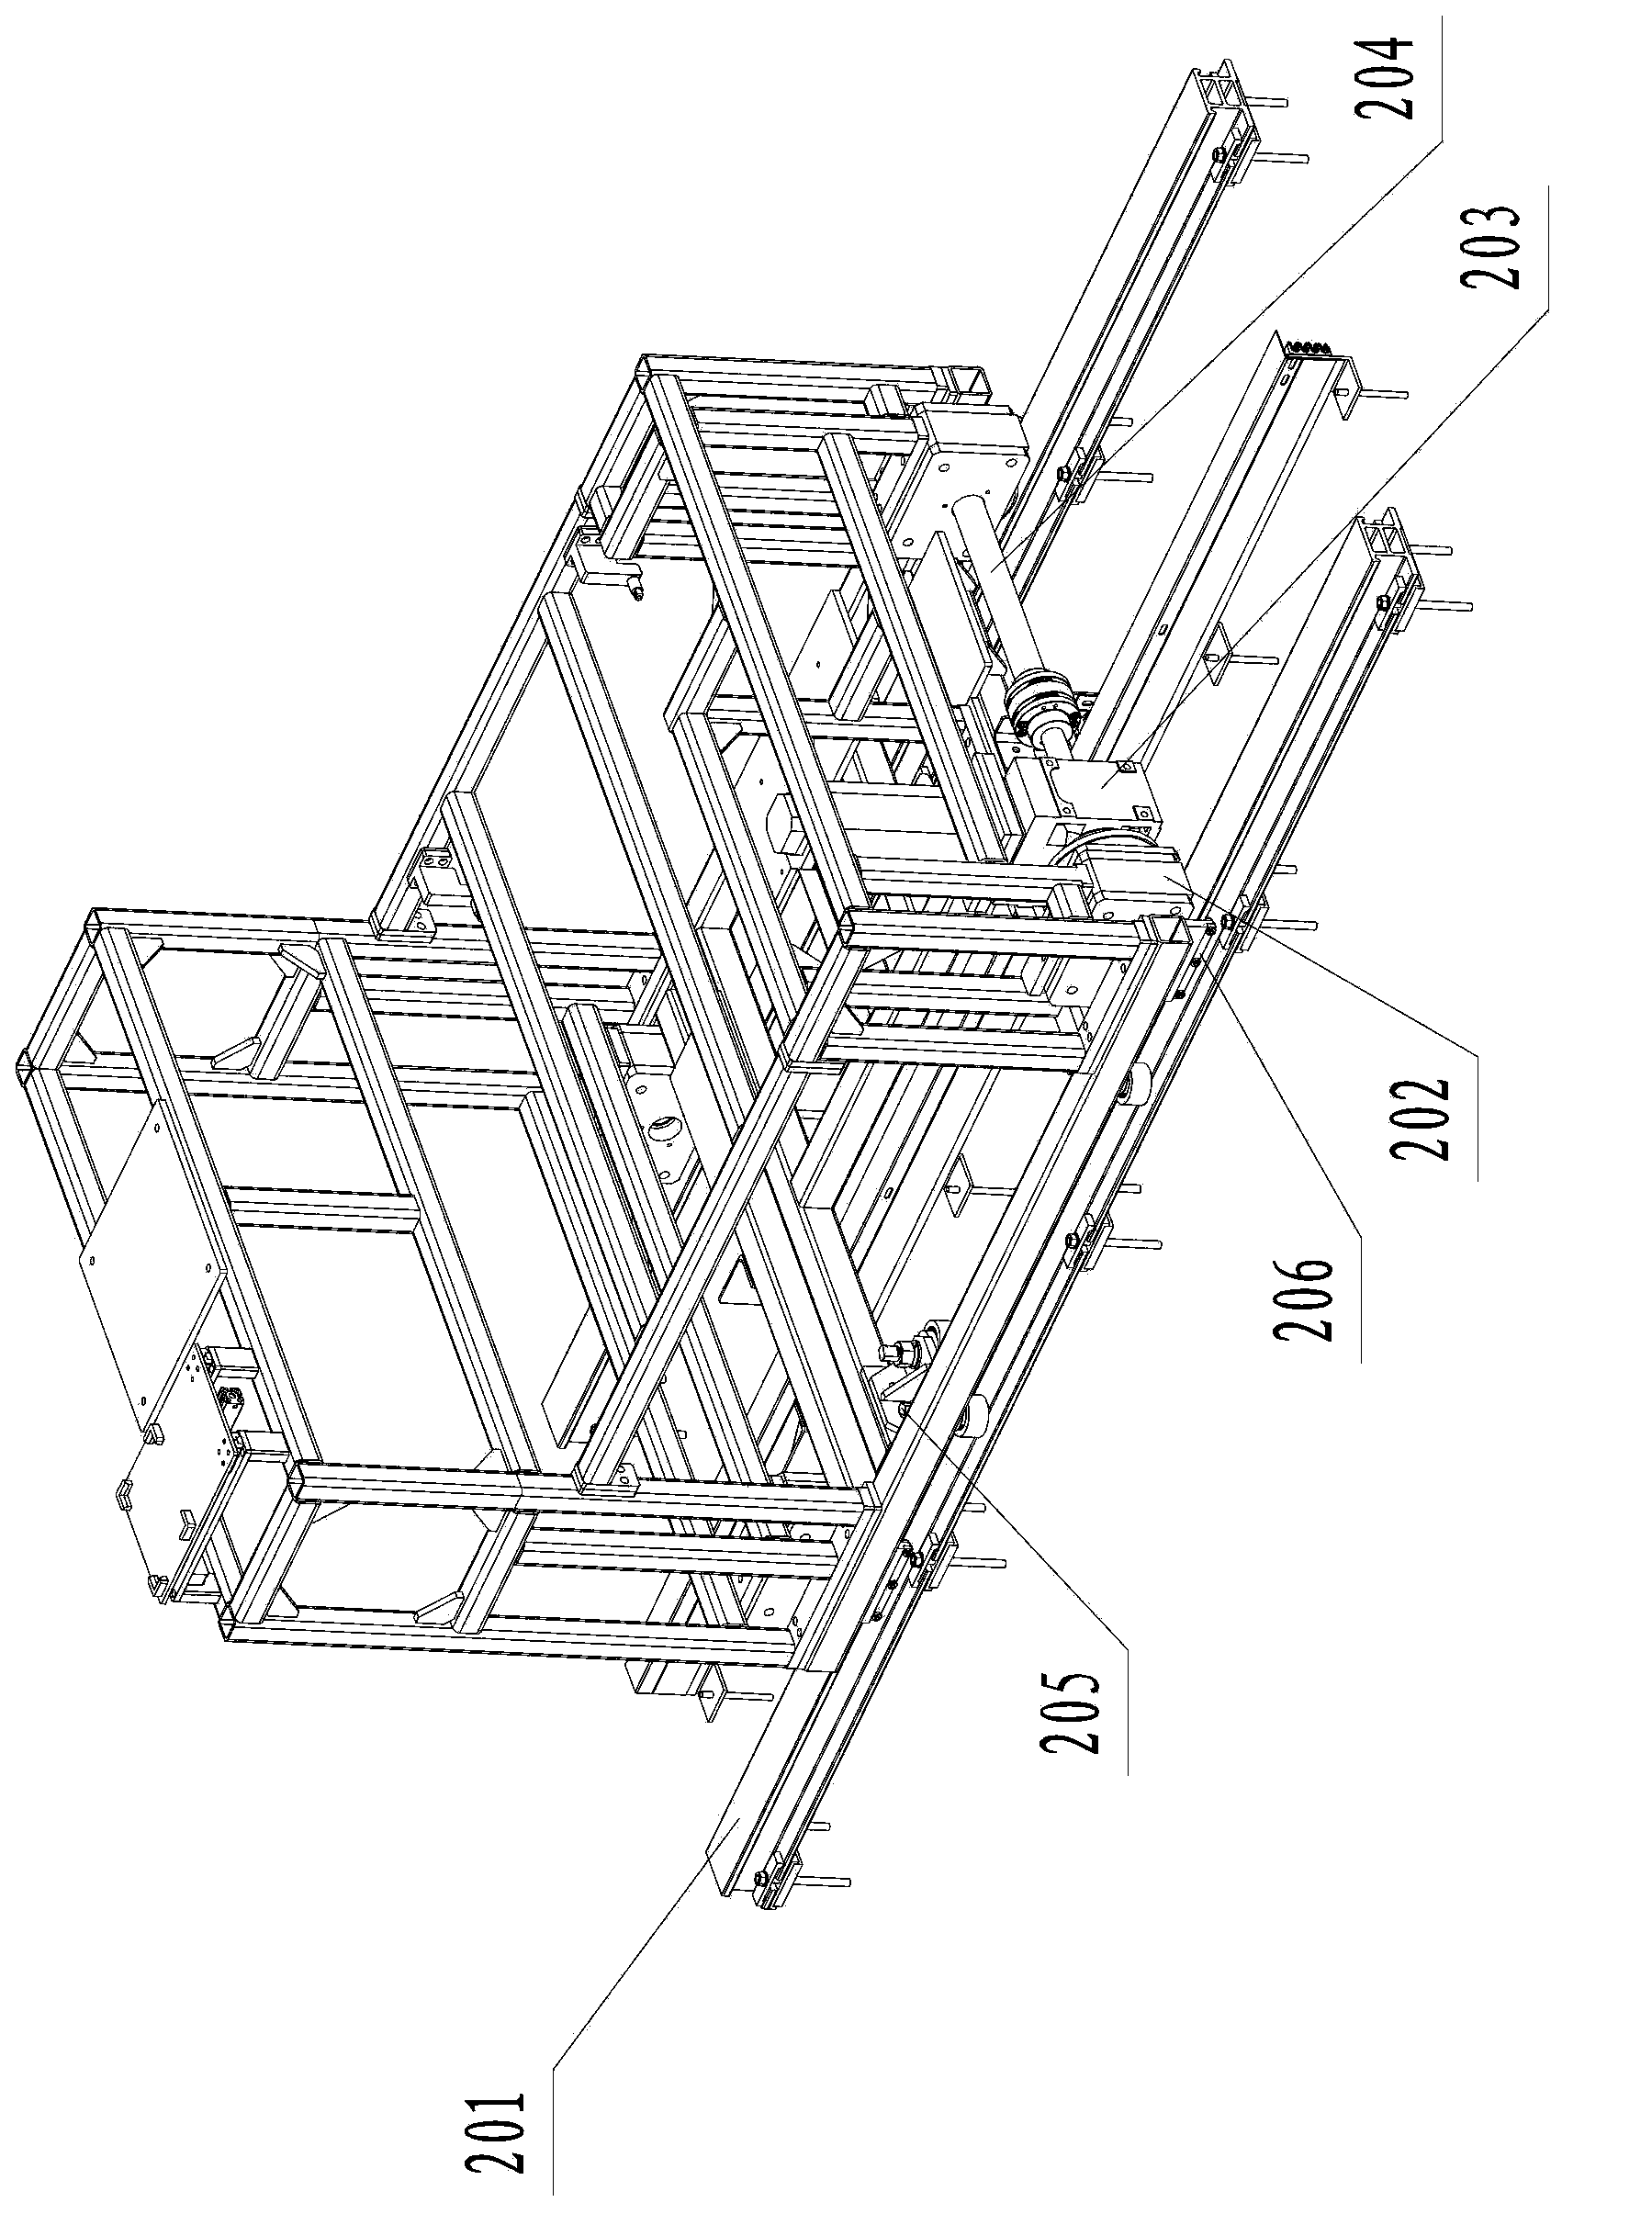 Feeding and discharging device of intelligent mobile robot